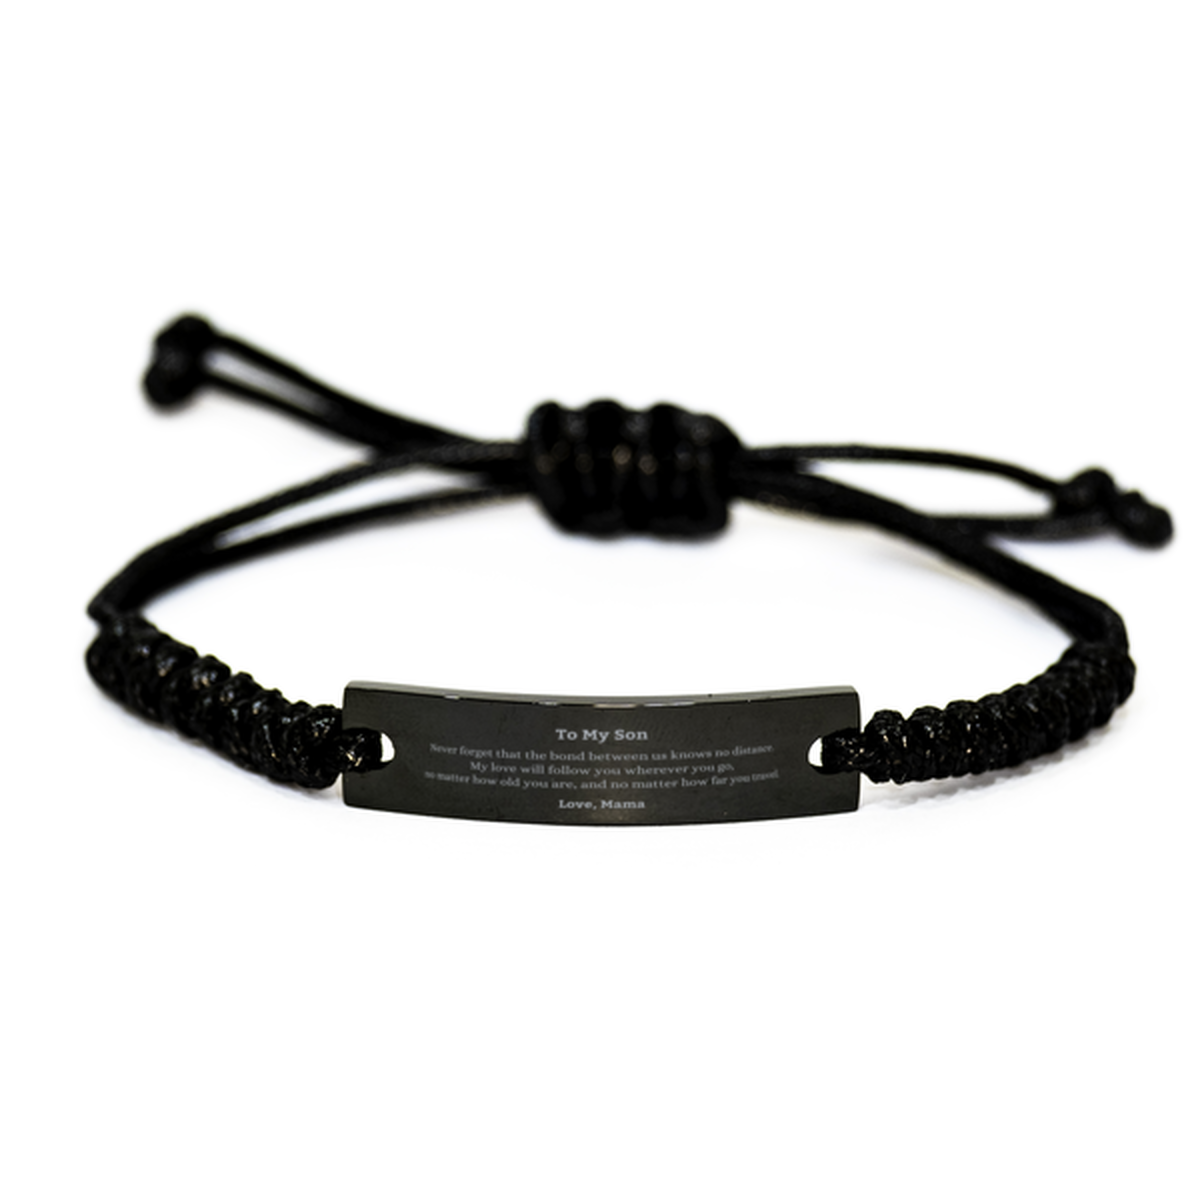 Son Birthday Gifts from Mama, Adjustable Black Rope Bracelet for Son Christmas Graduation Unique Gifts Son Never forget that the bond between us knows no distance. Love, Mama